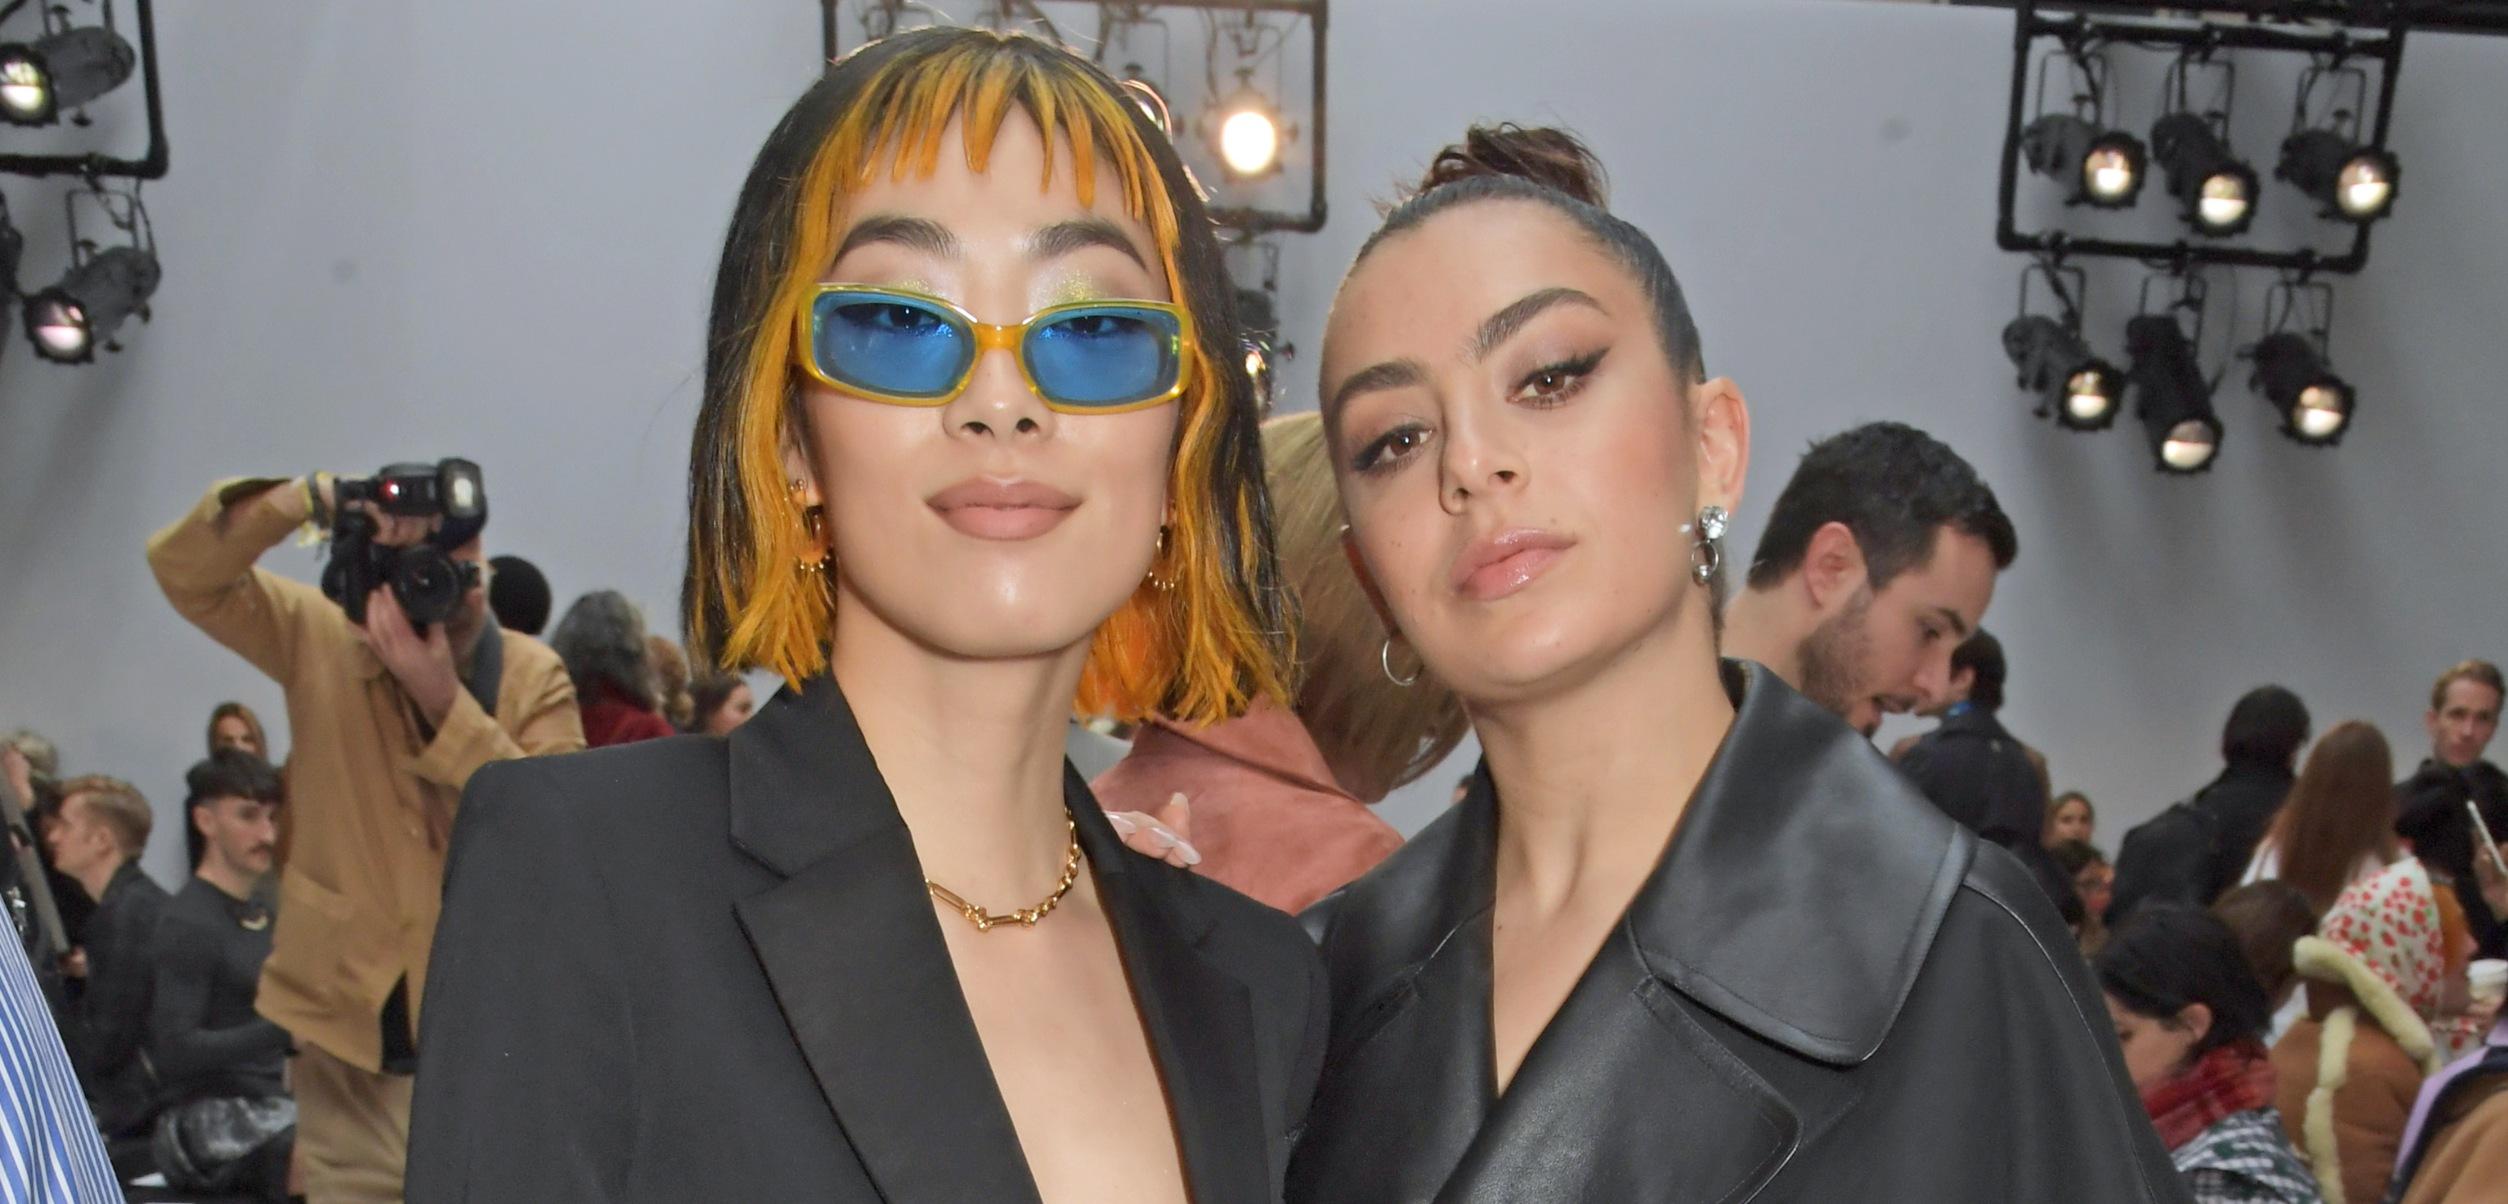 Rina Sawayama and Charli XCX attend the JW Anderson show during London Fashion Week